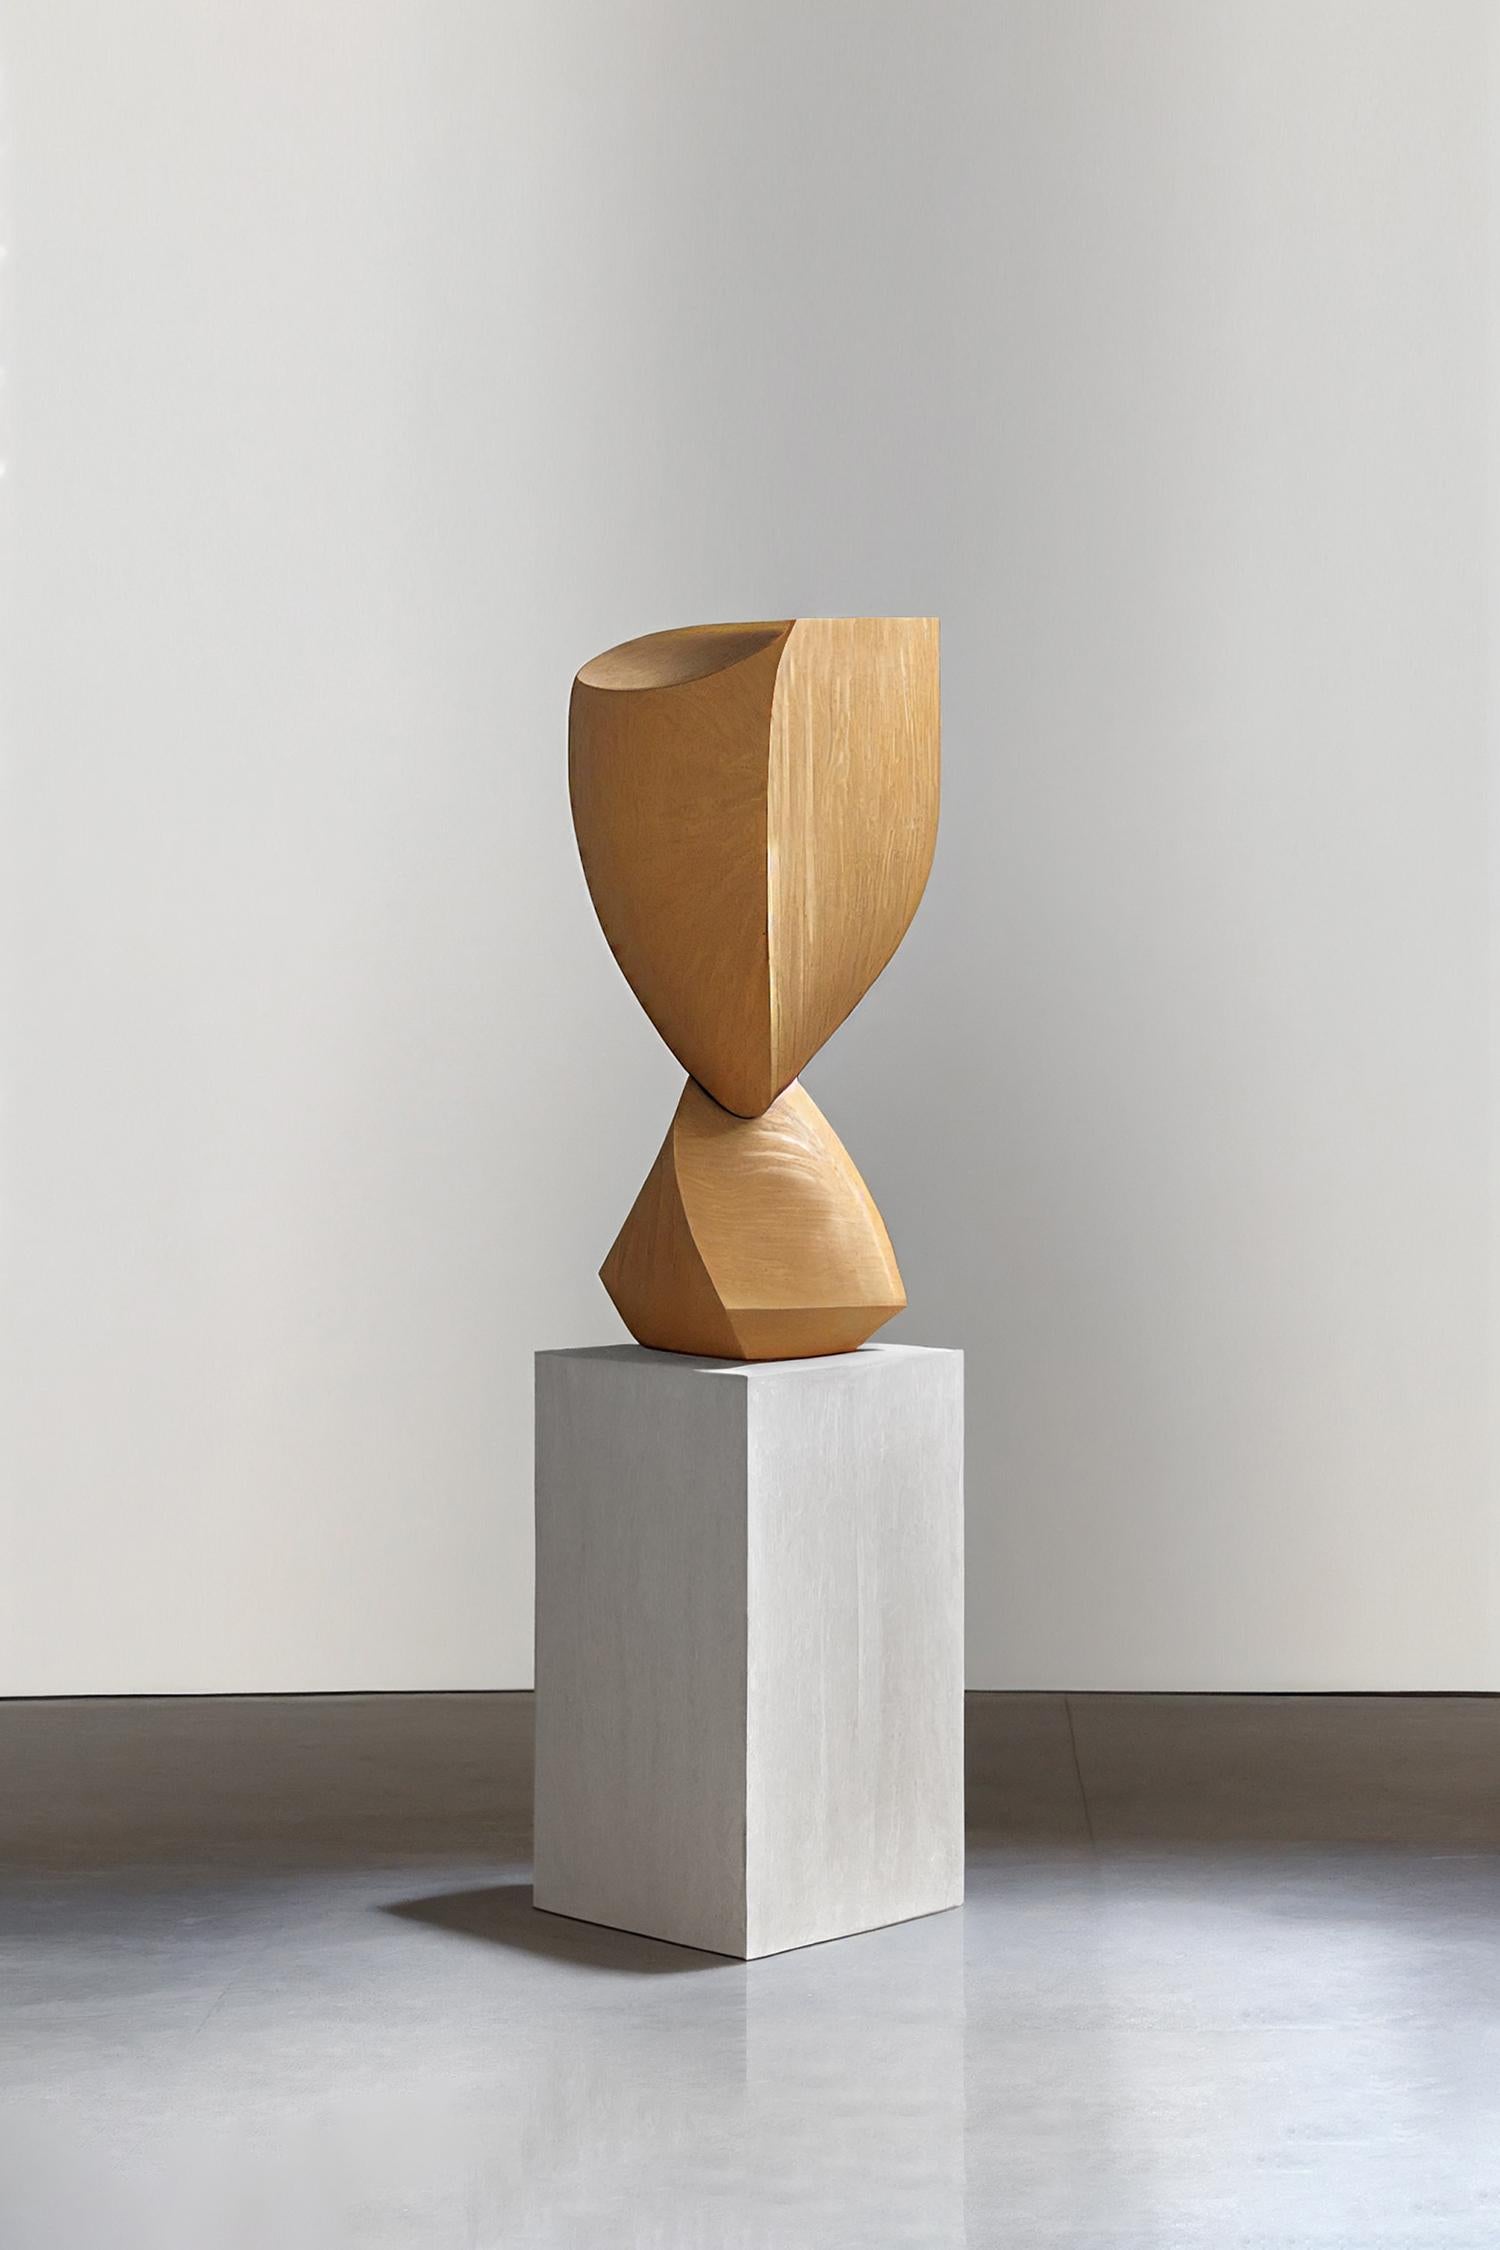 Abstract wood sculpture in the Flair of Scandinavian Art, Unseen Force by Joel Escalona.

This monolithic sculpture, designed by the talented Artist Joel Escalona, is a towering example of beauty in craftsmanship. Hand and digital machine made; the